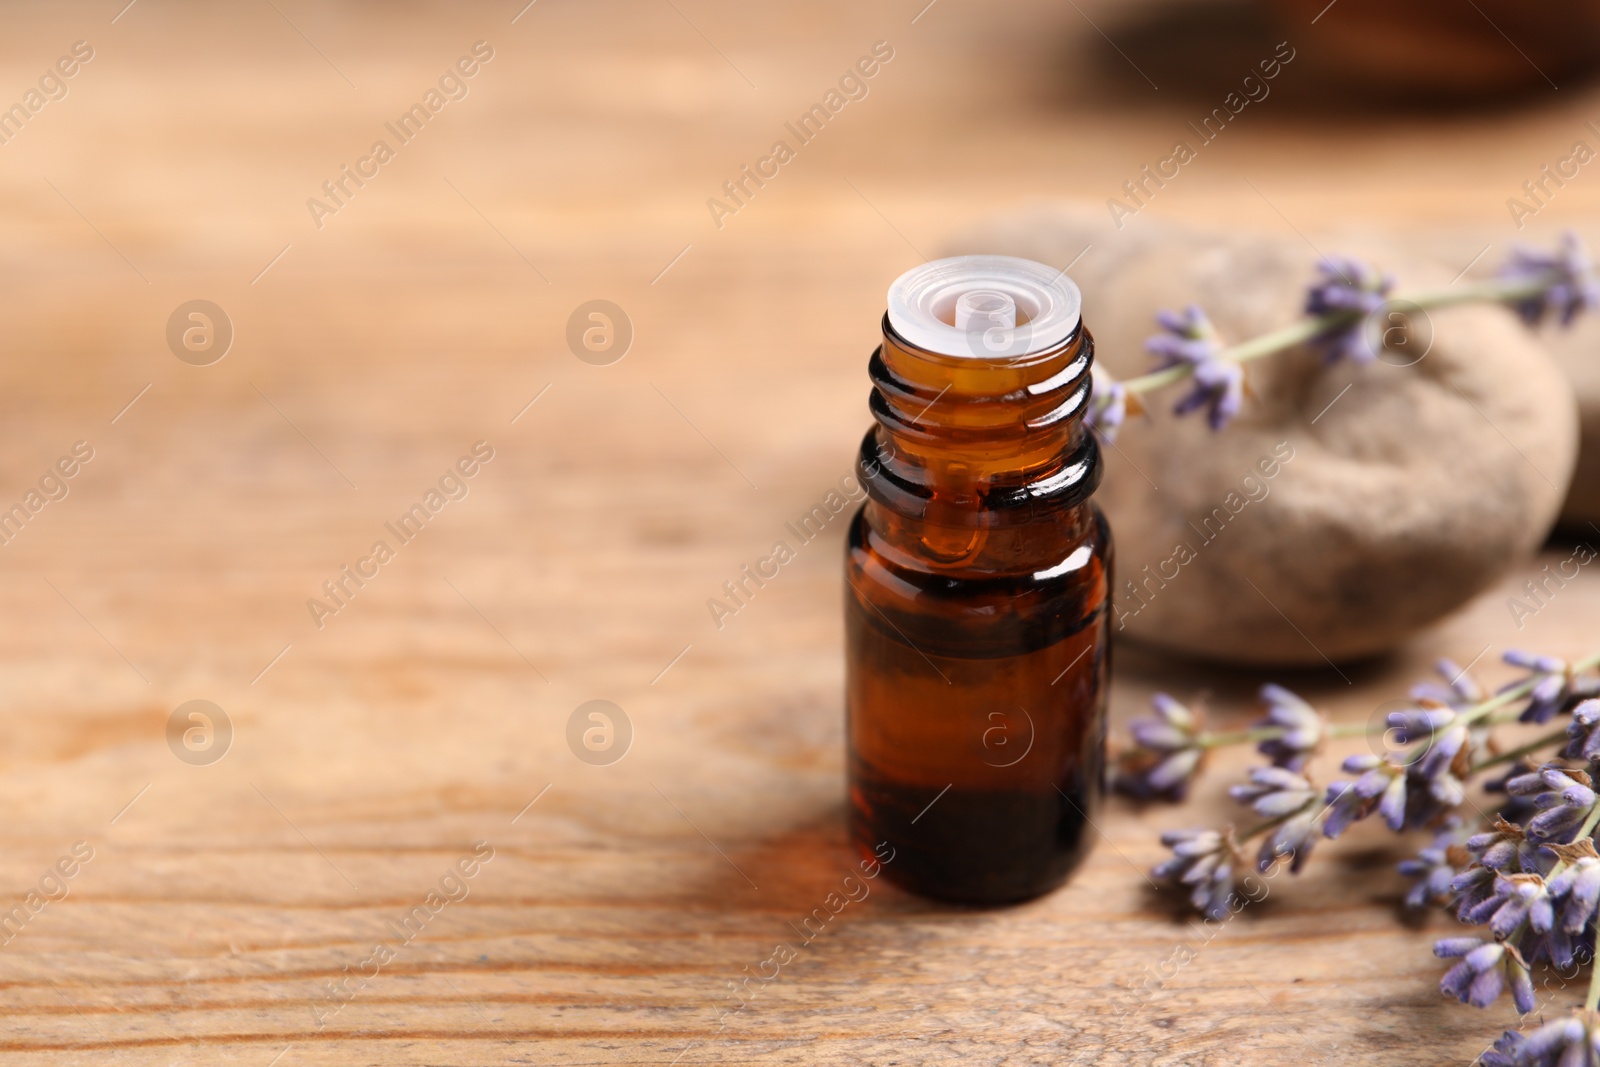 Photo of Bottle of essential oil and lavender flowers on wooden table, closeup. Space for text